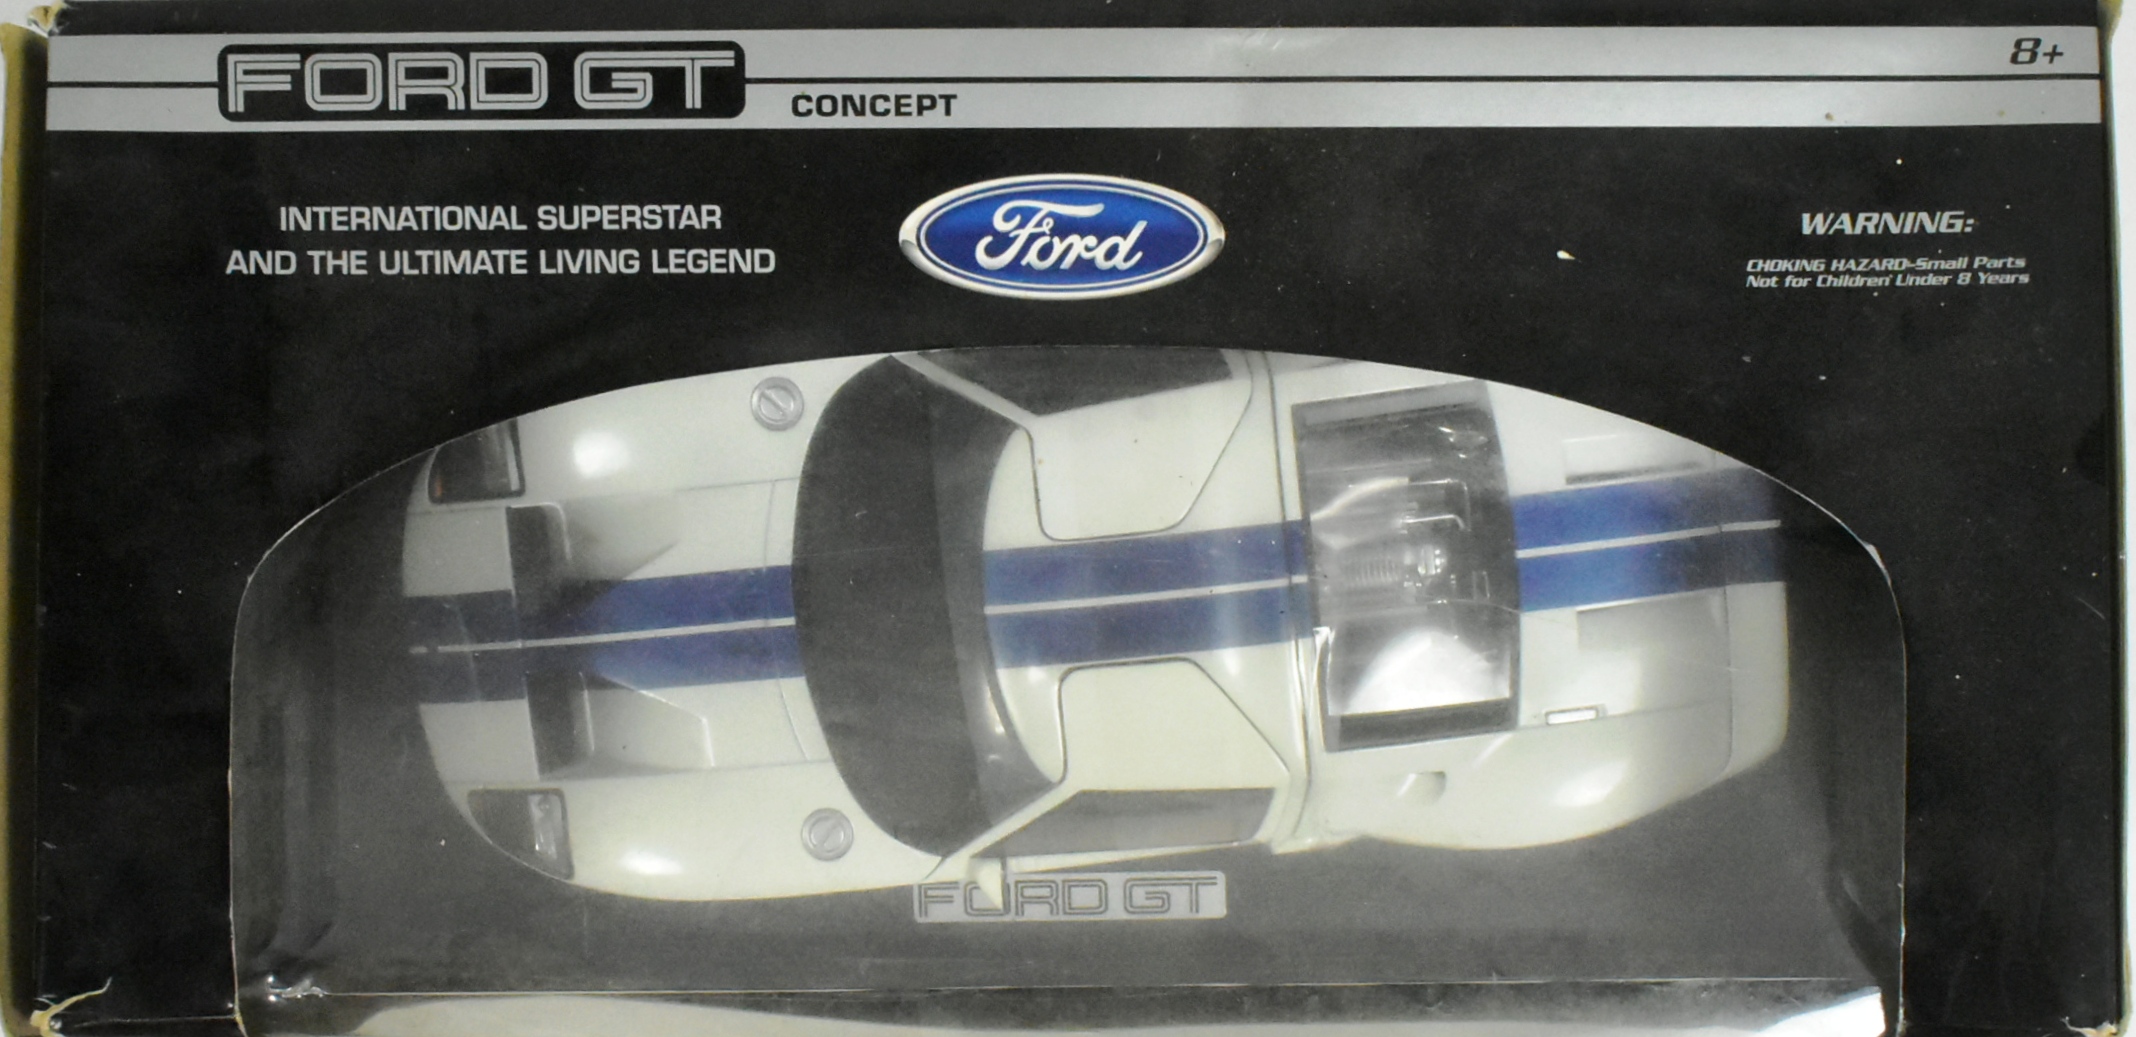 DIECAST - 1/18 SCALE FORD GT CONCEPT CAR - Image 3 of 4